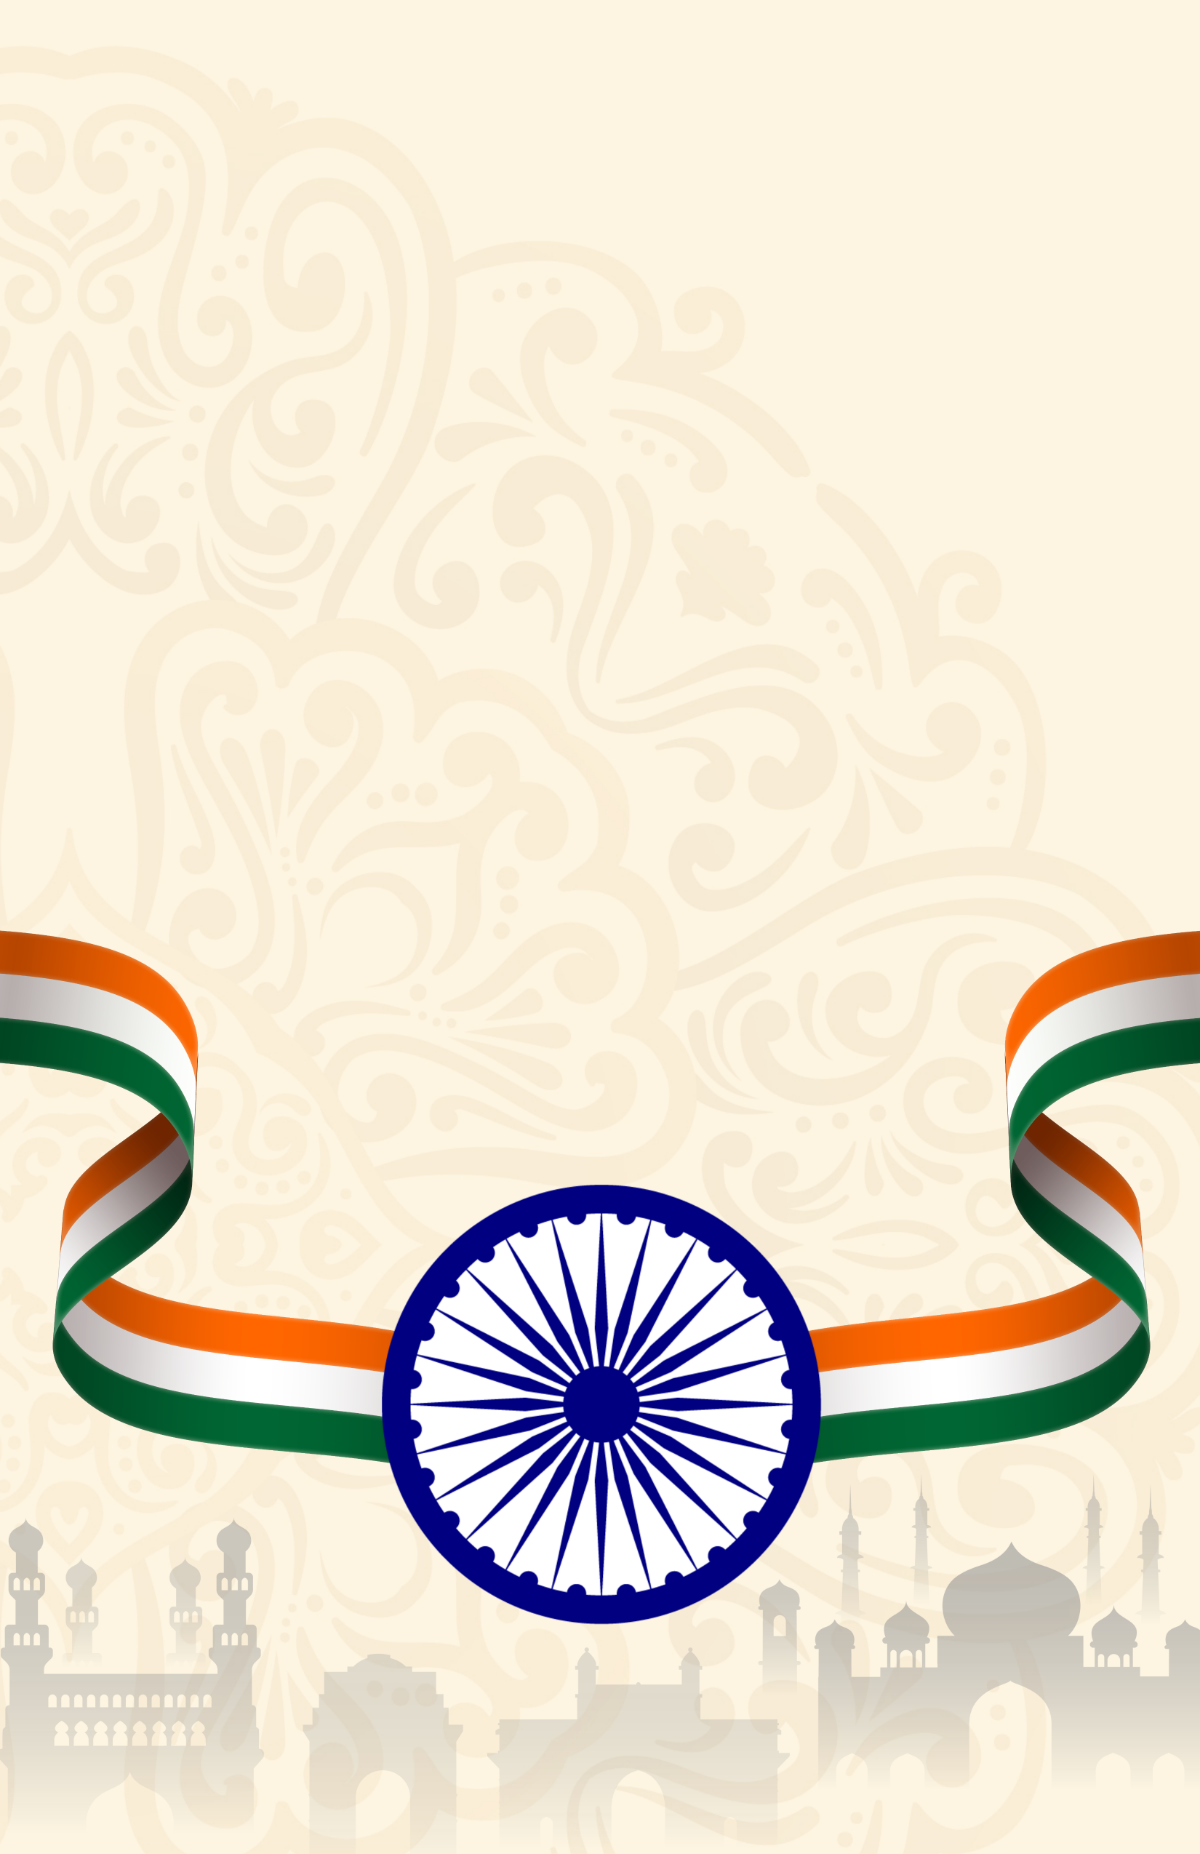 Republic Day Wishes Poster Design Template